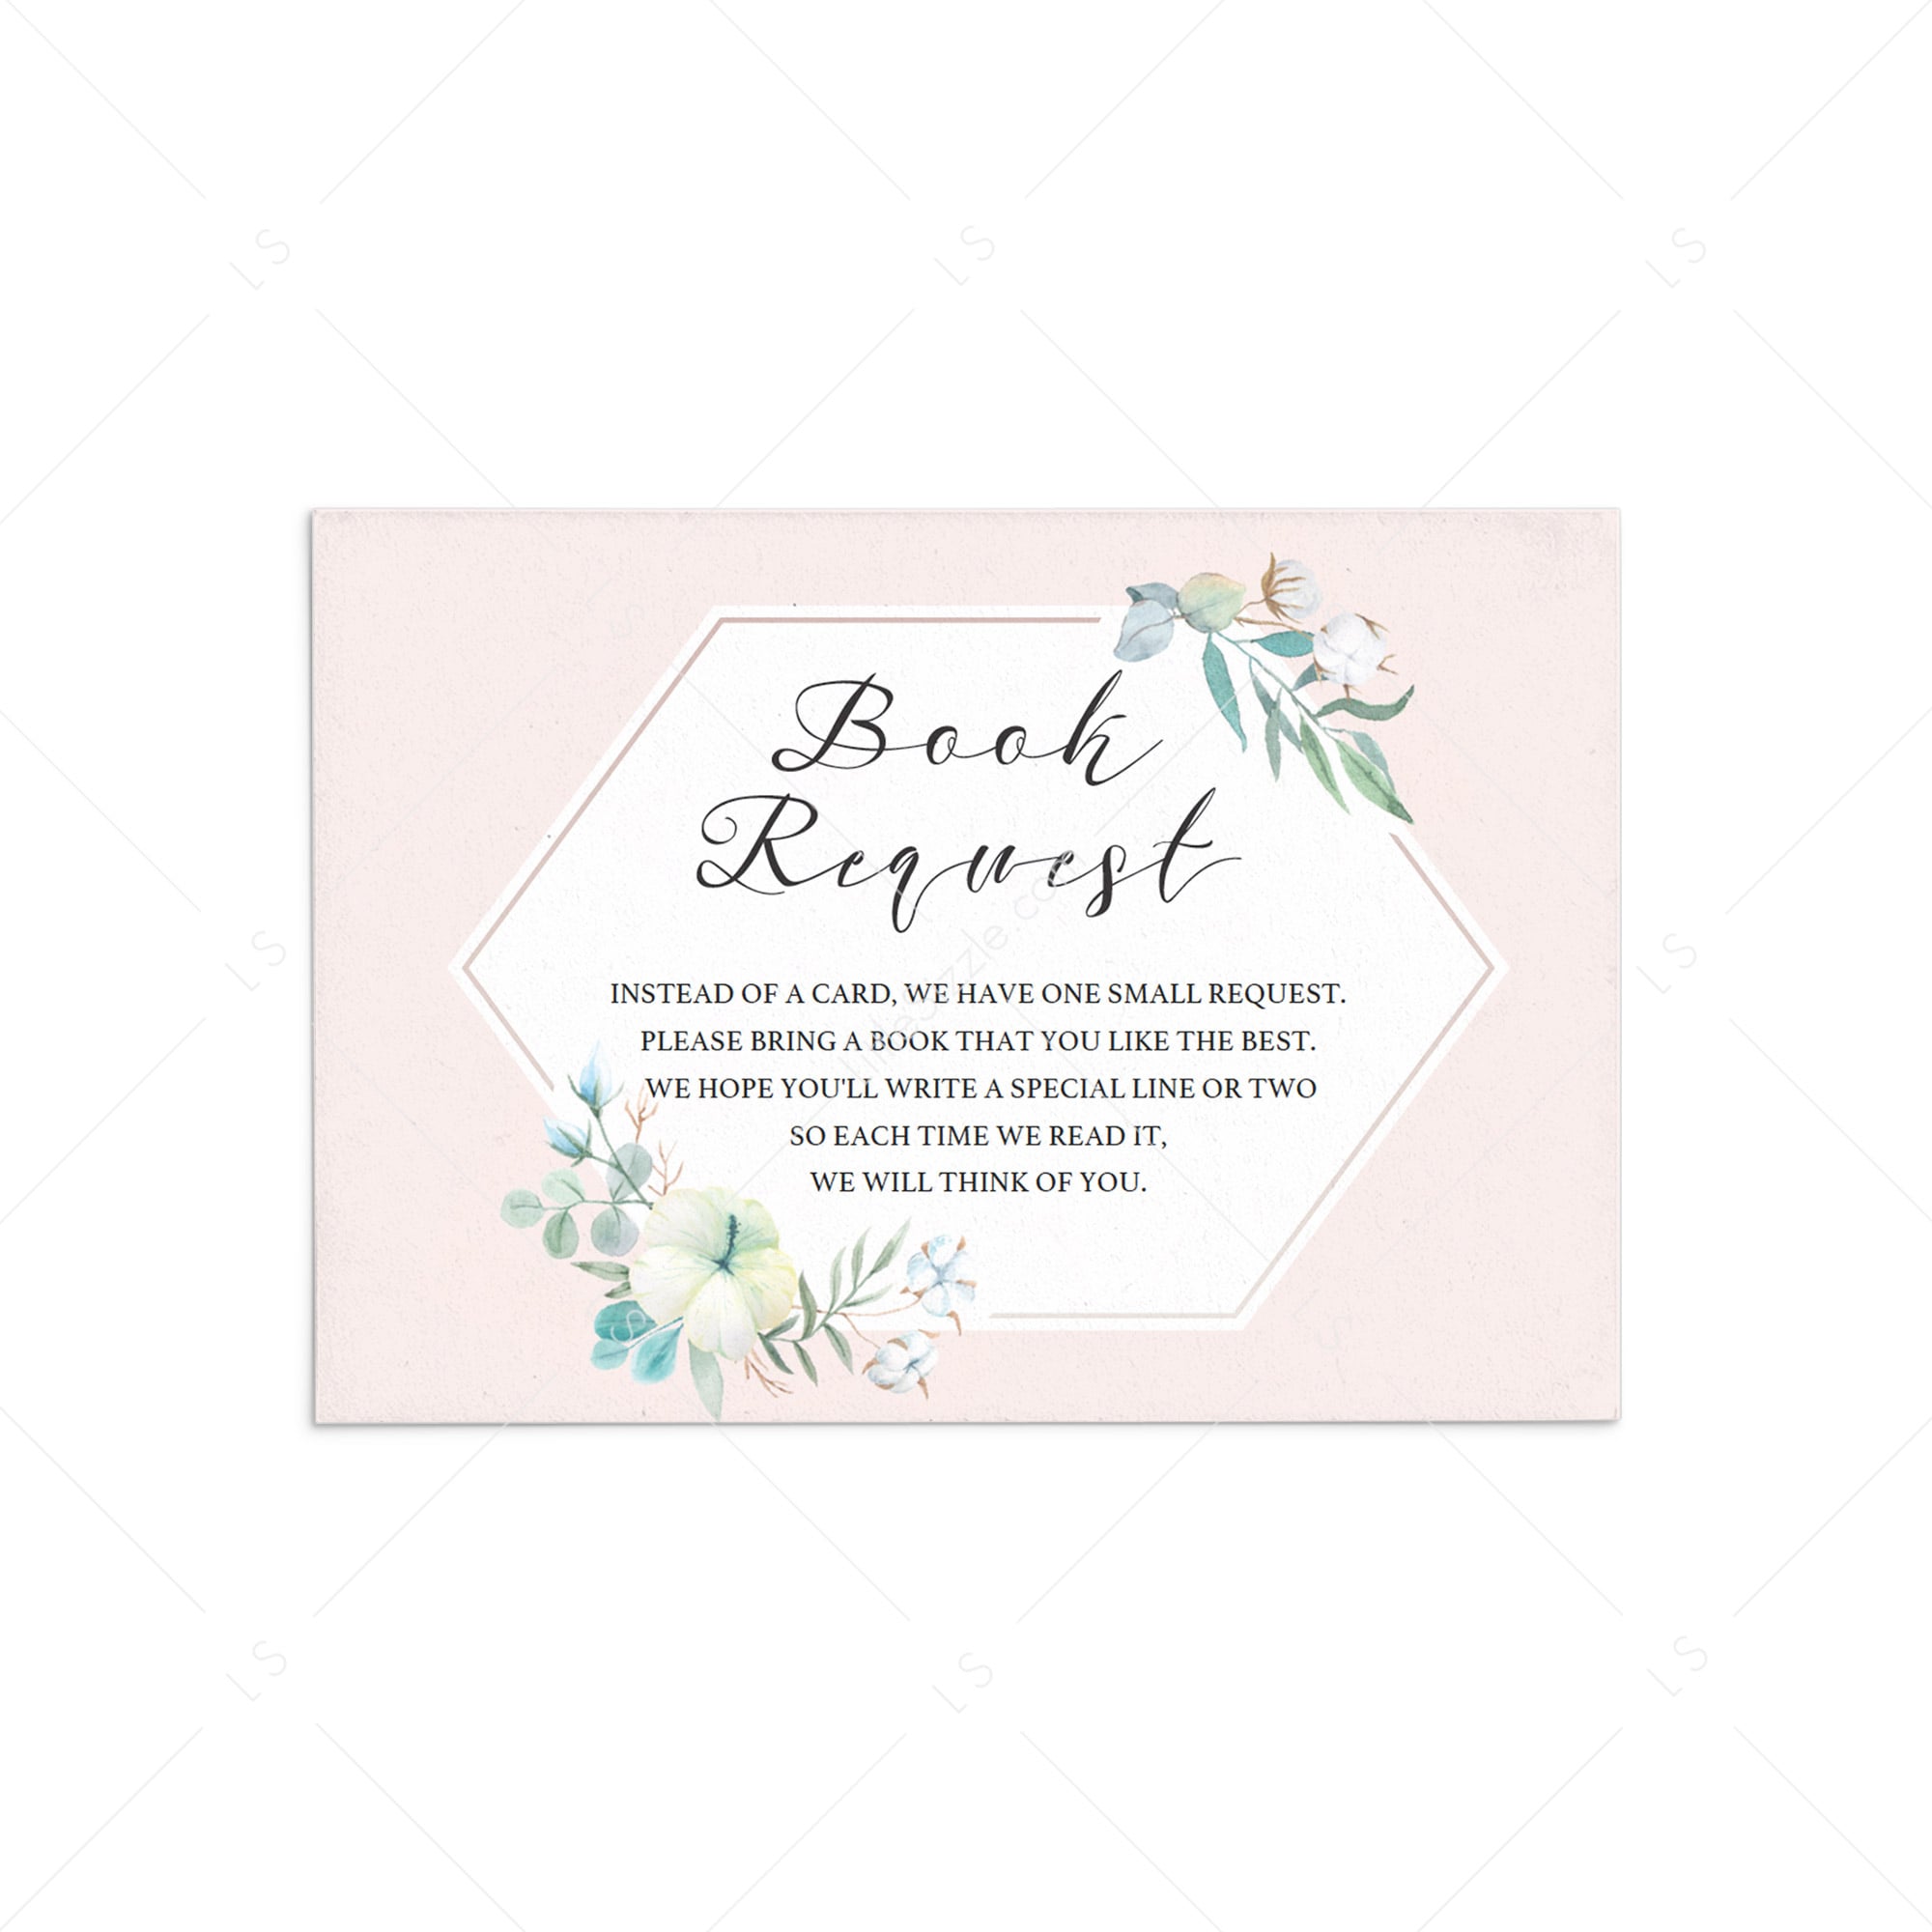 Blush baby shower book request card by LittleSizzle